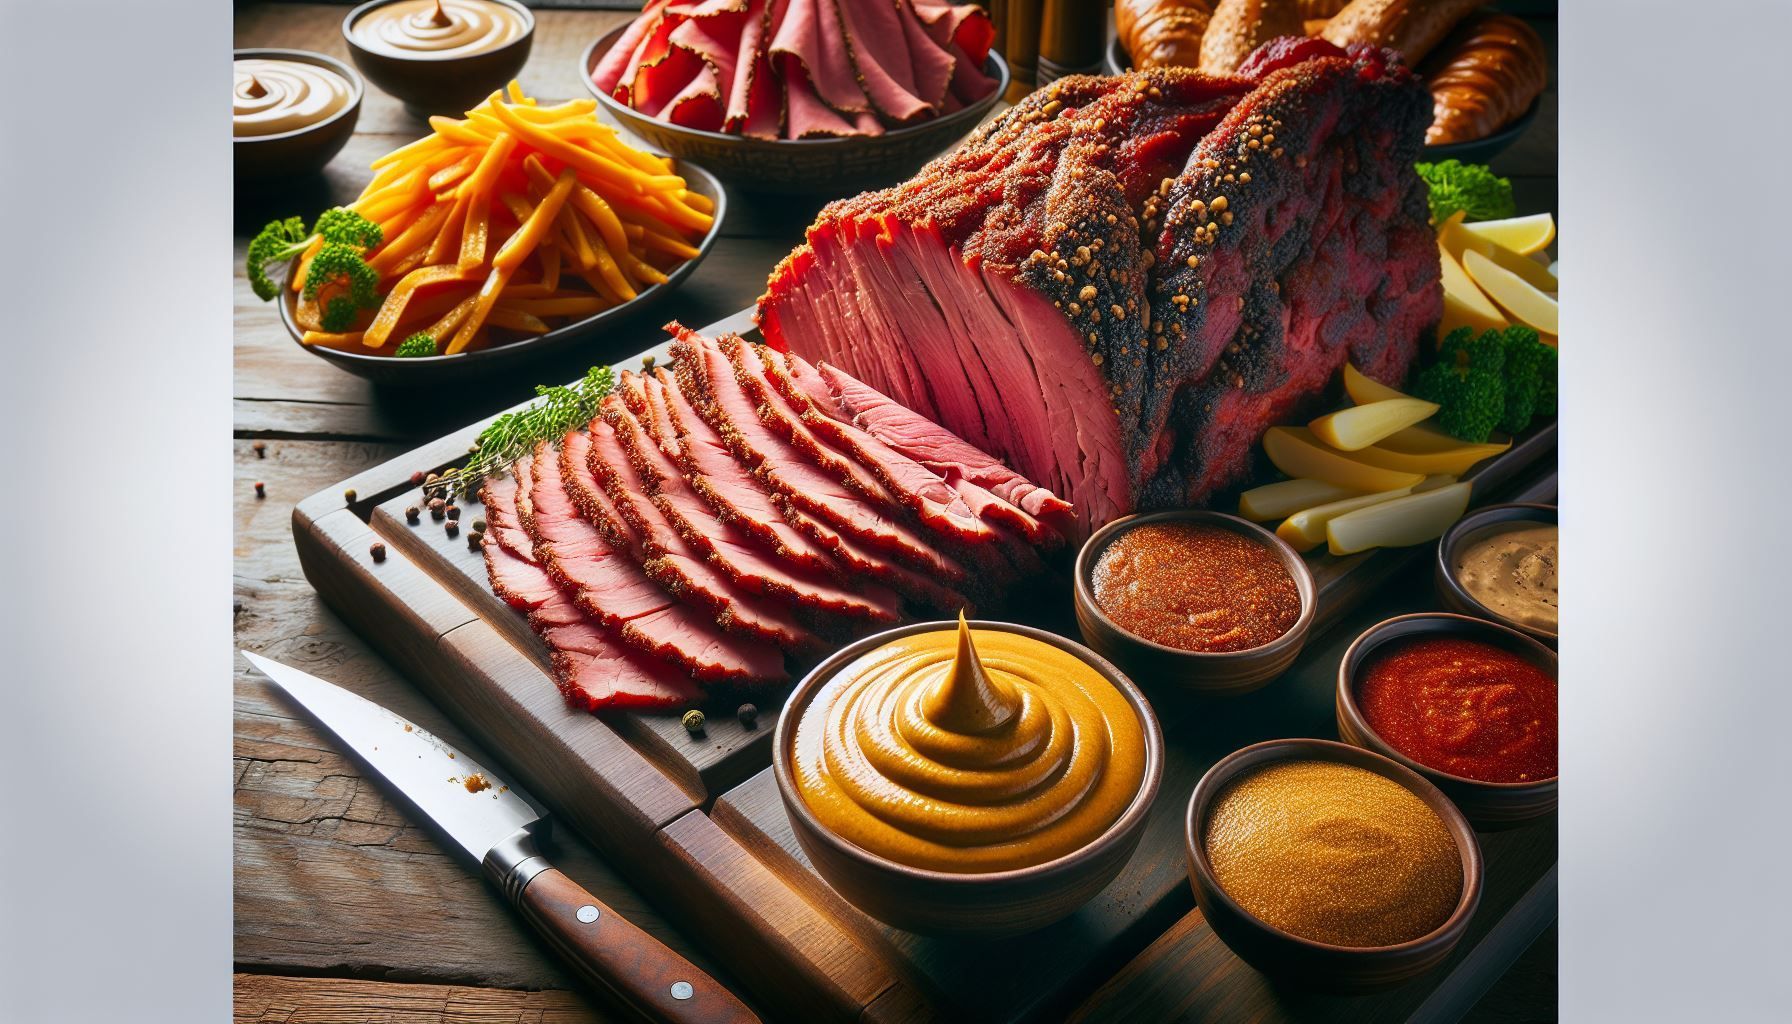 A large piece of meat is sitting on a wooden cutting board surrounded by condiments.